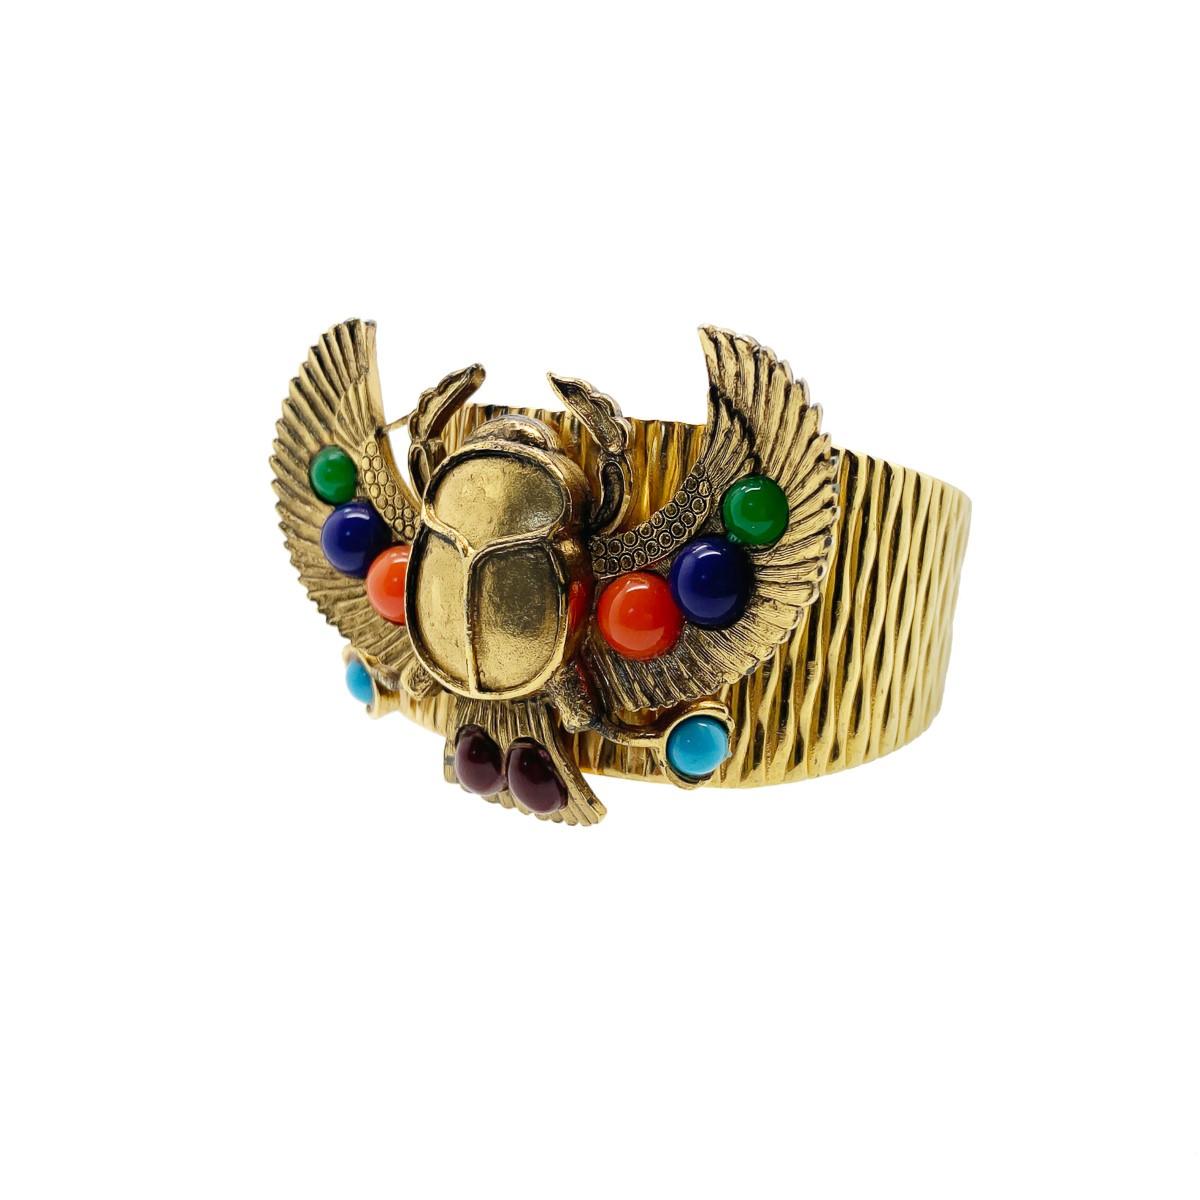 A stunning Vintage Egyptian Revival Scarab Cuff. Featuring a bark effect cuff with large Egyptian stylised scarab plaque set with coloured glass cabochons. 
Vintage Condition: Very good without damage or noteworthy wear. 
Materials: Gold plated